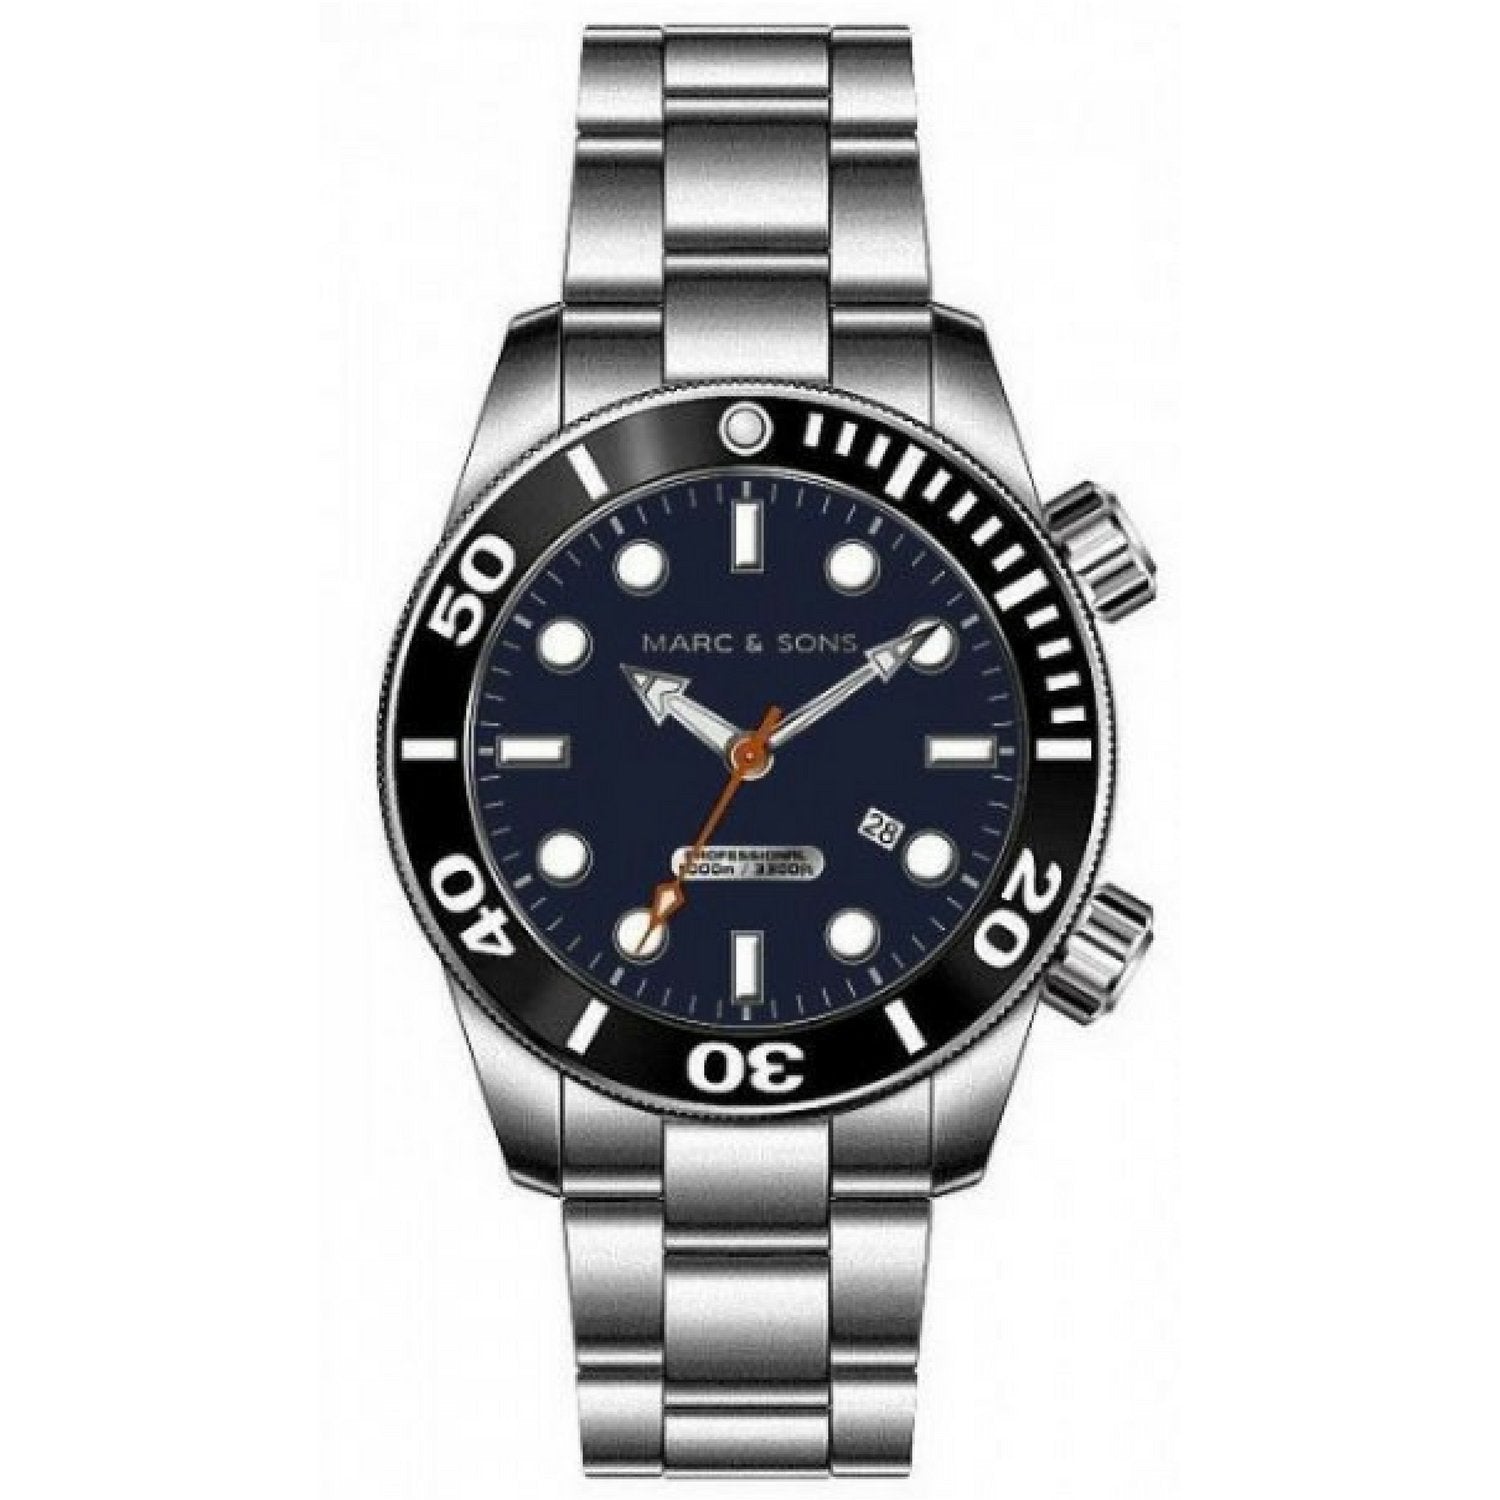 MARC & SONS 1000M Professional Automatic Divers Watch MSD-043